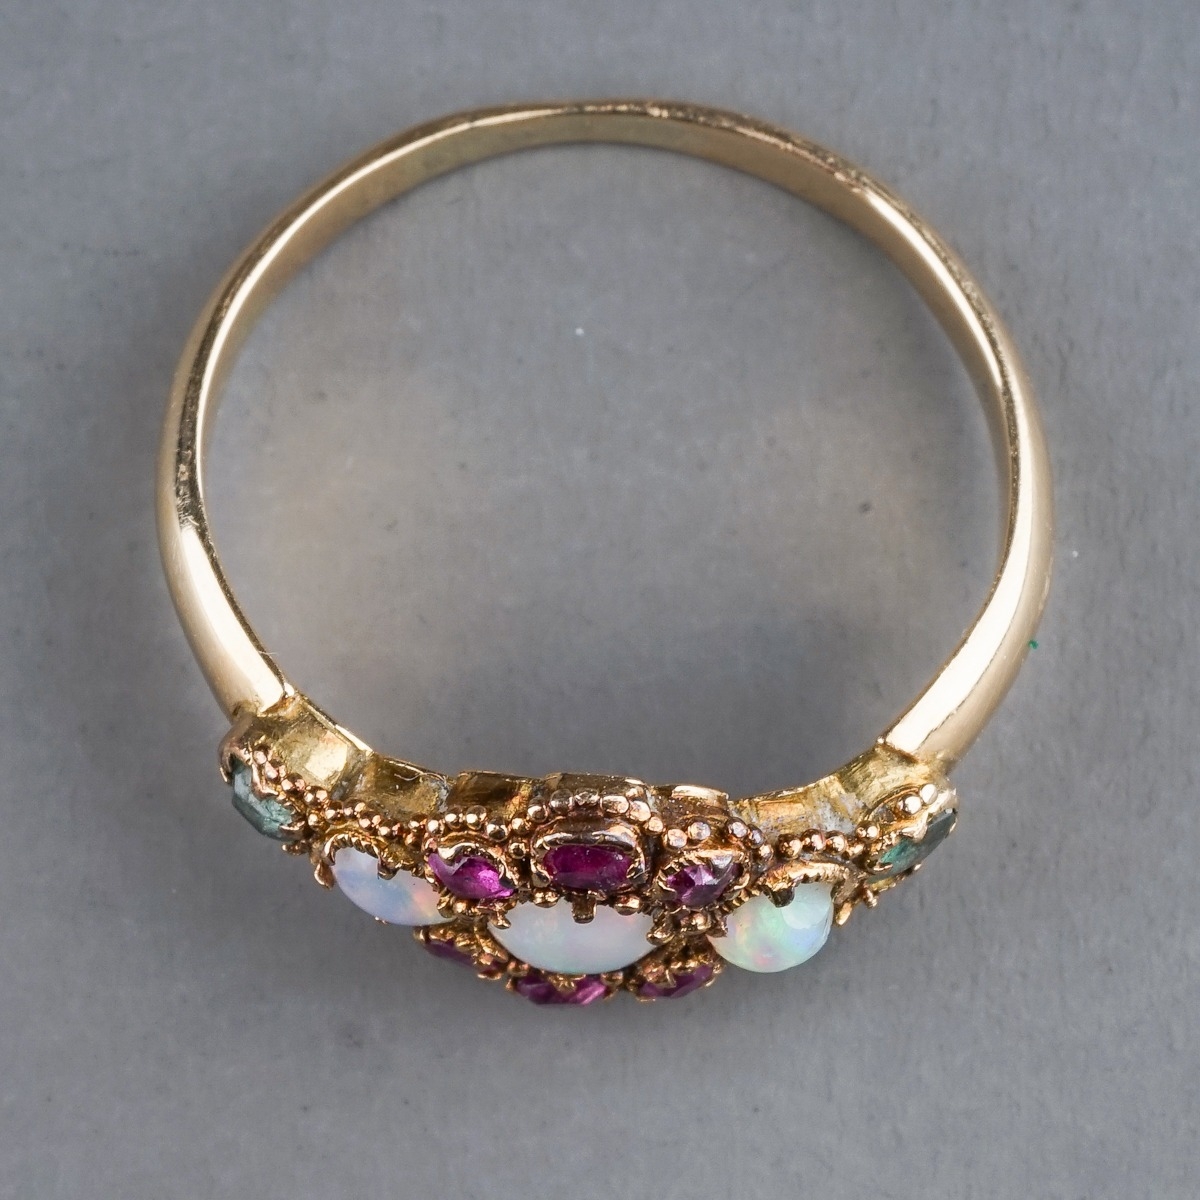 An early 20th century yellow gold opal cluster ring, set with three round cabochon opals within a - Image 3 of 3